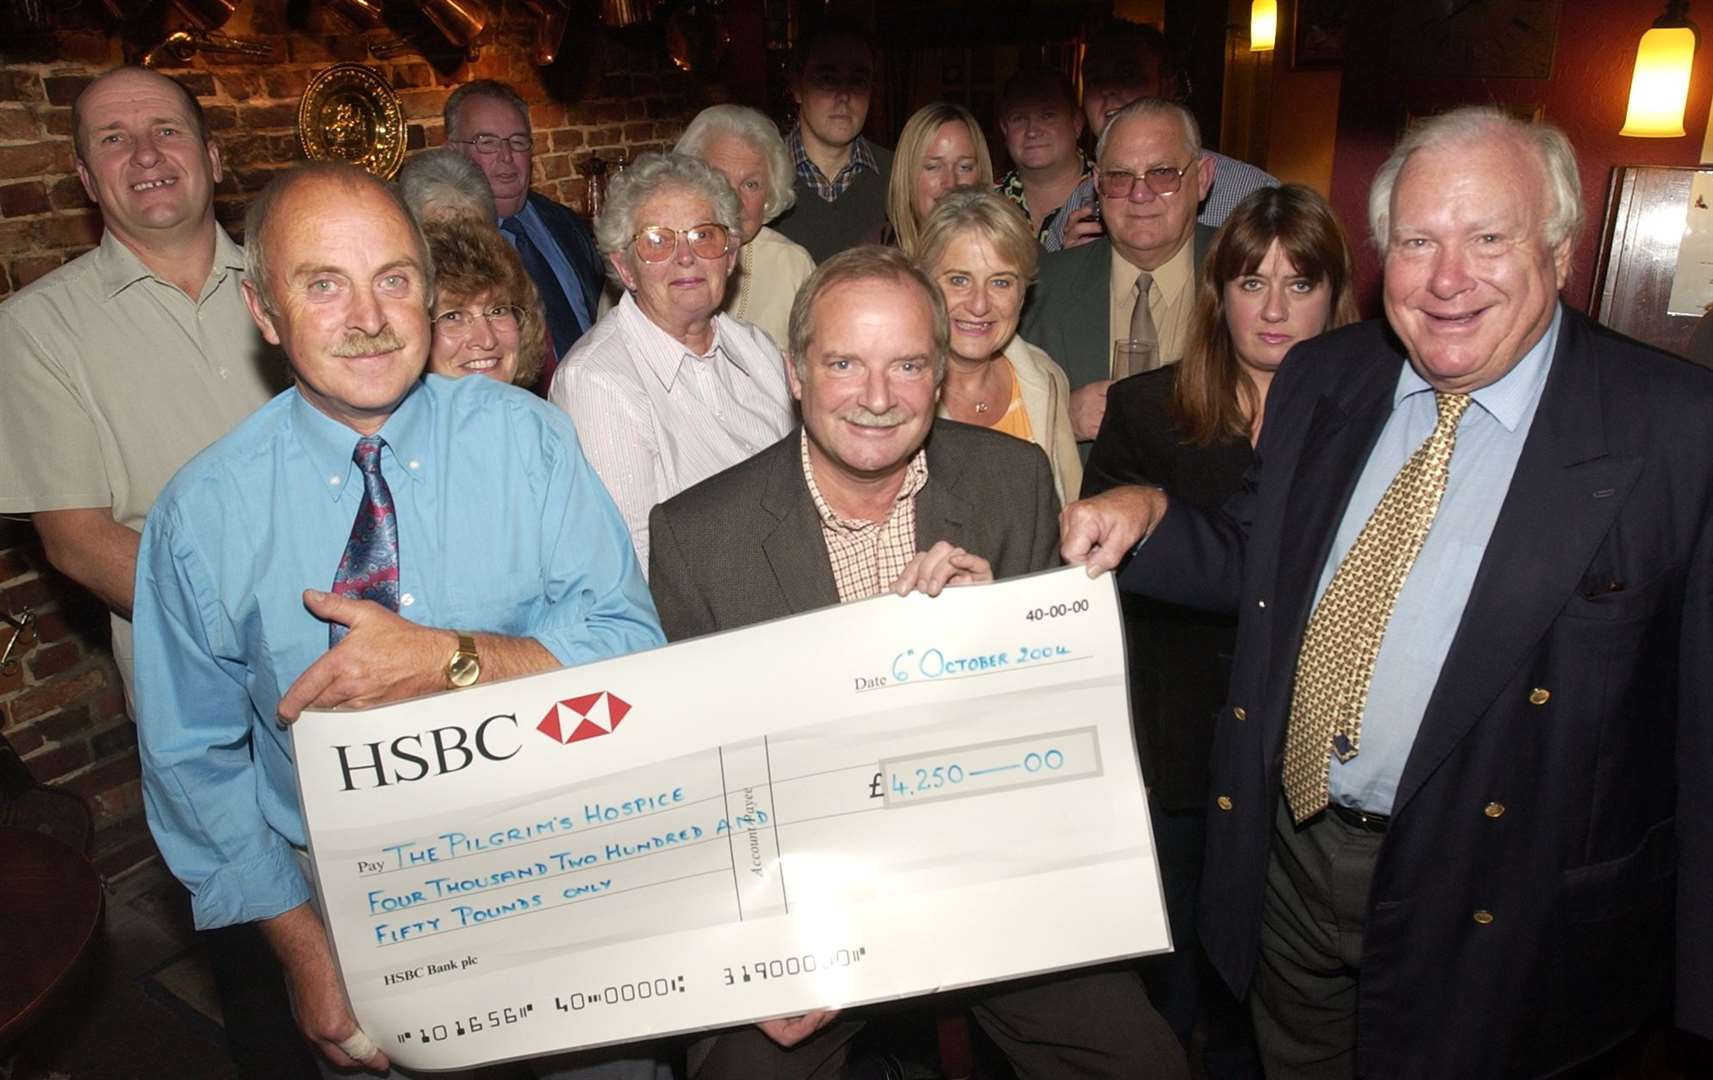 A village event raised £4,250 for the Pilgrims Hospice in October 2004